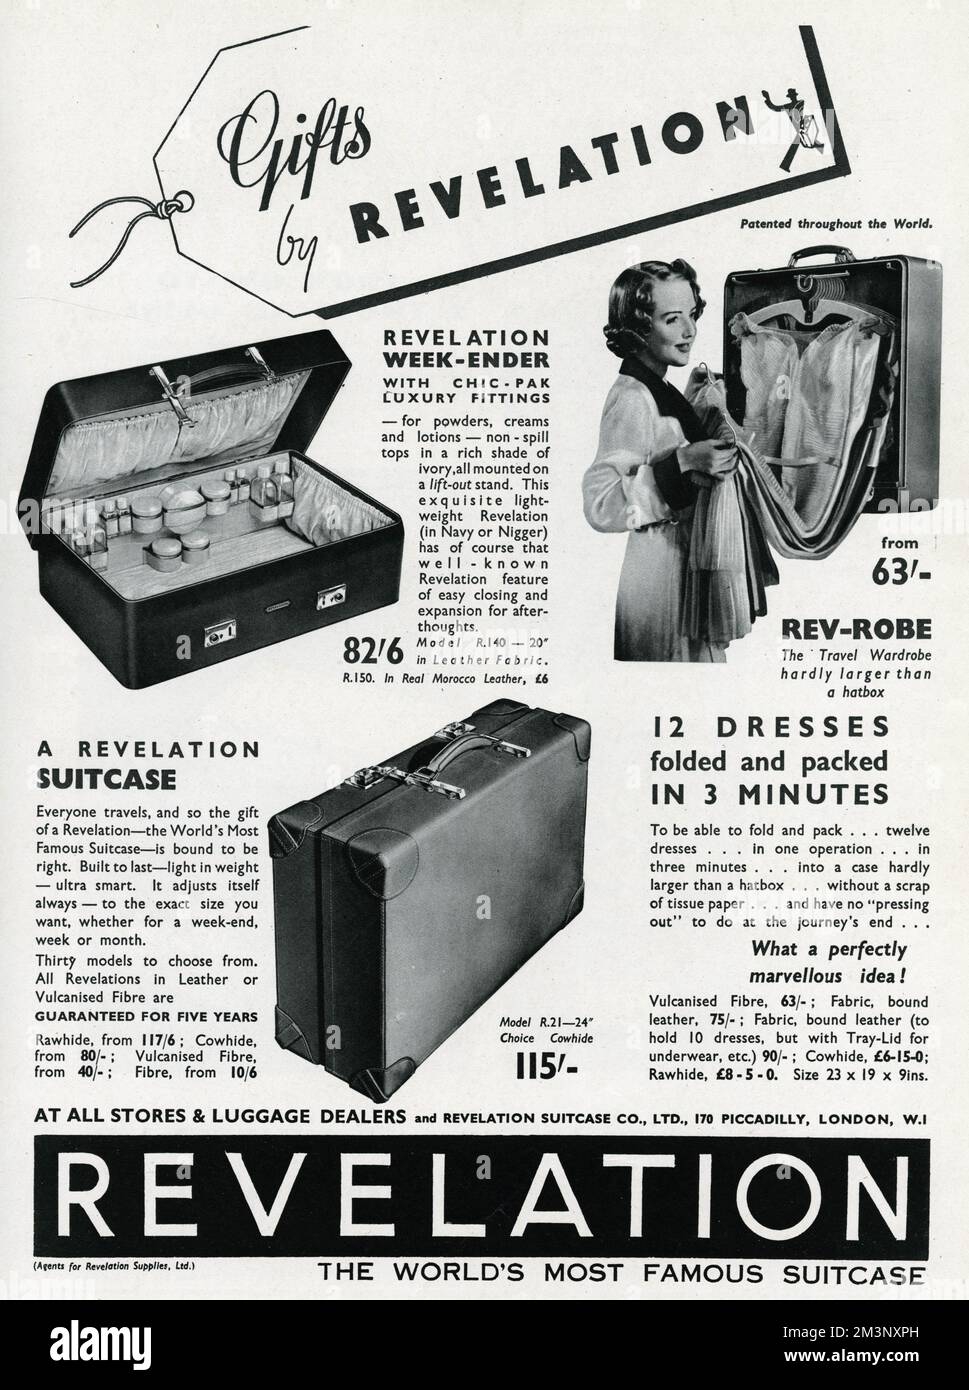 'Gifts by Revelation'.  A range of Revelation suitcases, from holders for your bottles of creams and lotions.  To a travel case to hang your dresses straight from your wardrobe into your Rev-Robe with no pressing out to be done at the end of your journey.   1937 Stock Photo